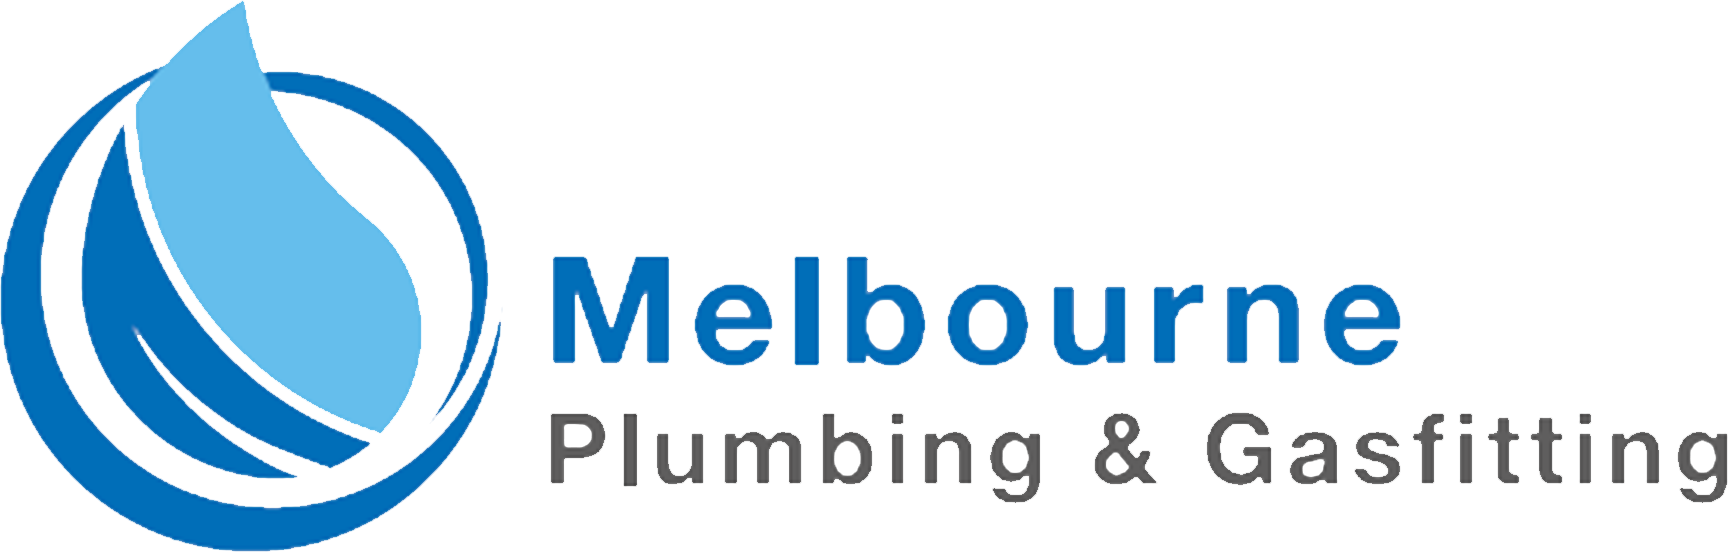 melbourne-plumbing-gas-fitting